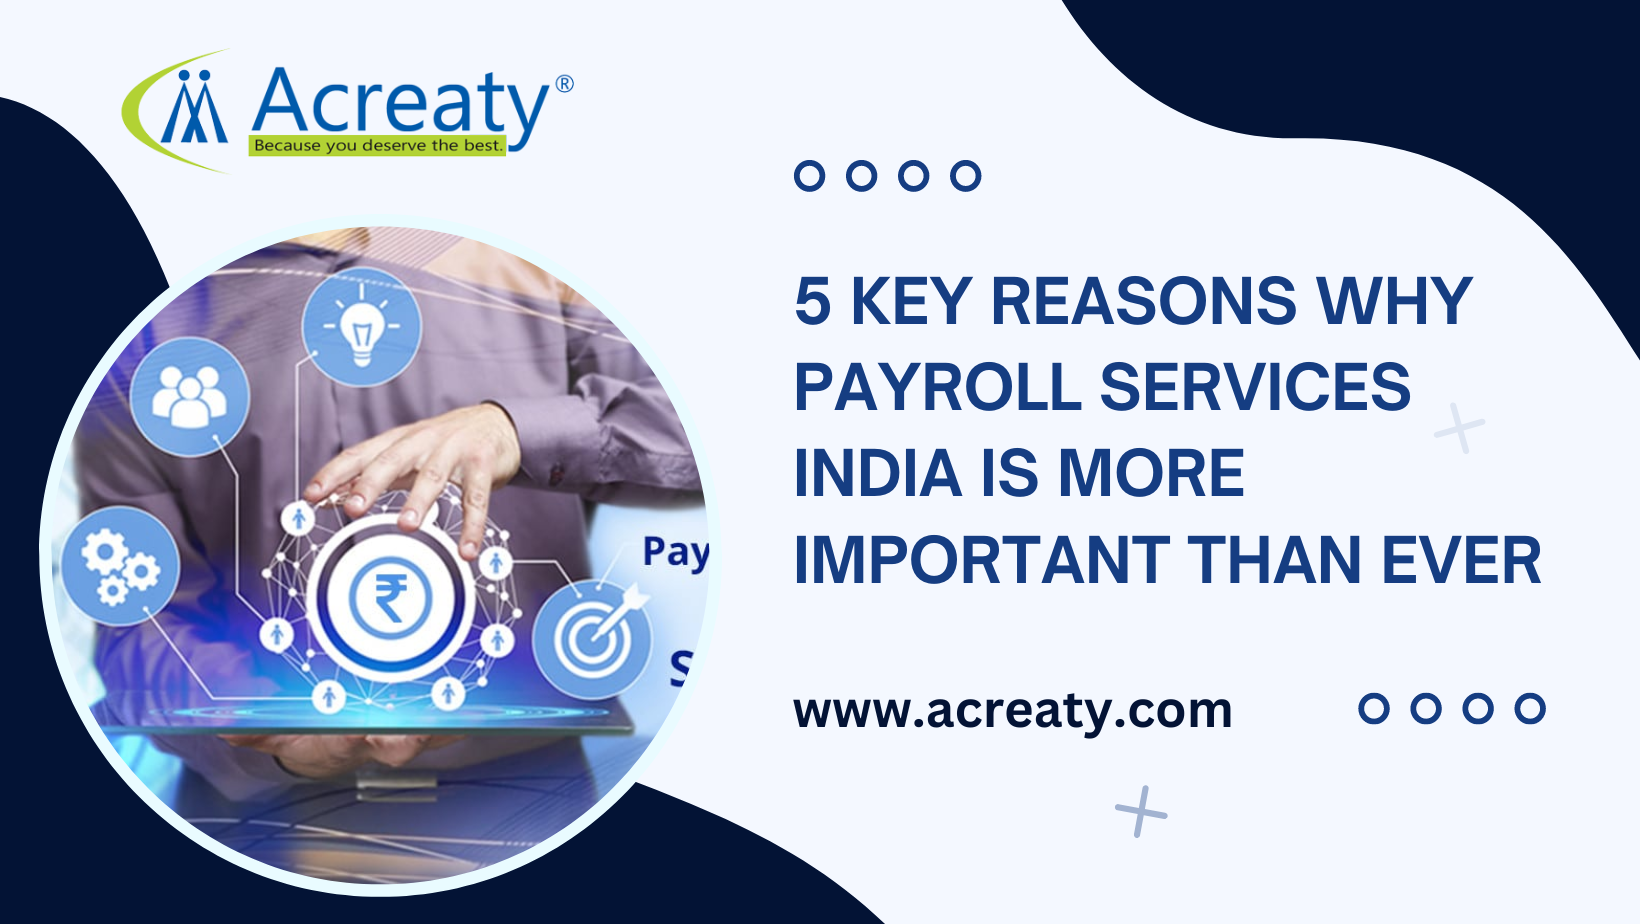 5 Key Reasons Why Payroll Services India is More Important than Ever